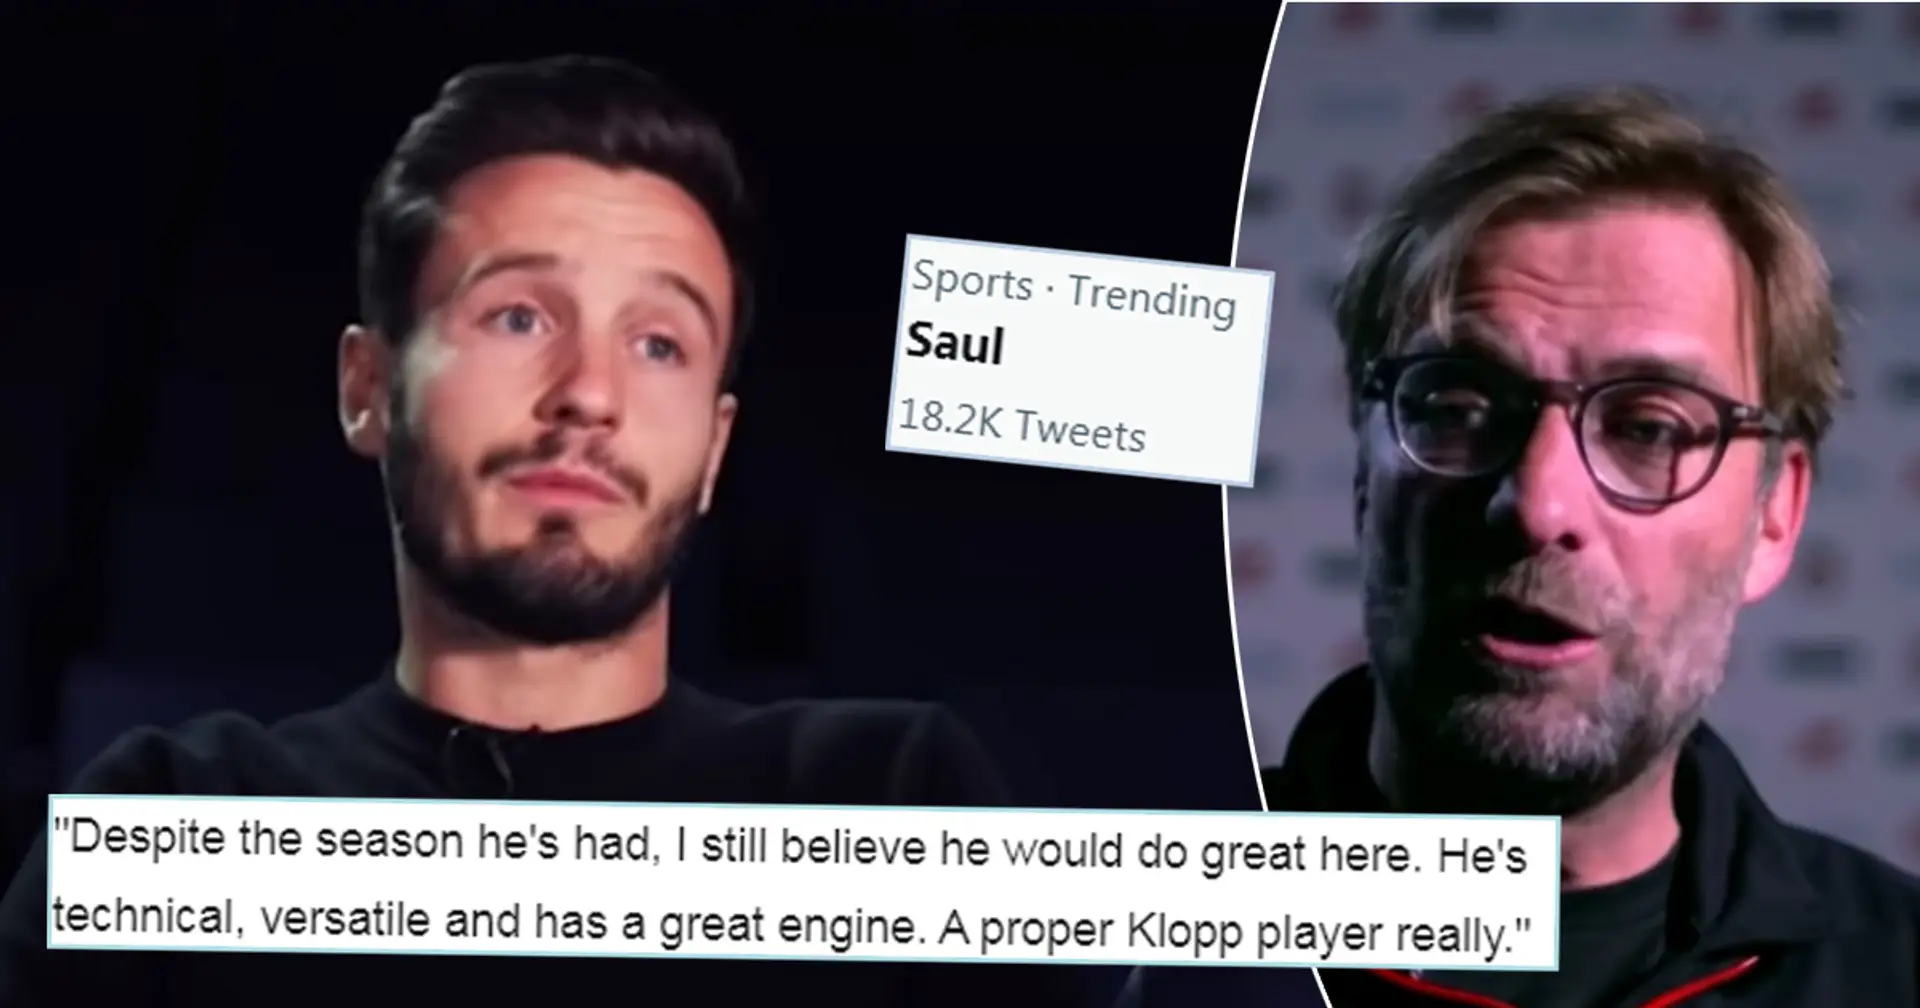 'I've dreamt of a transfer like this': Liverpool fans ecstatic as Saul links intensify